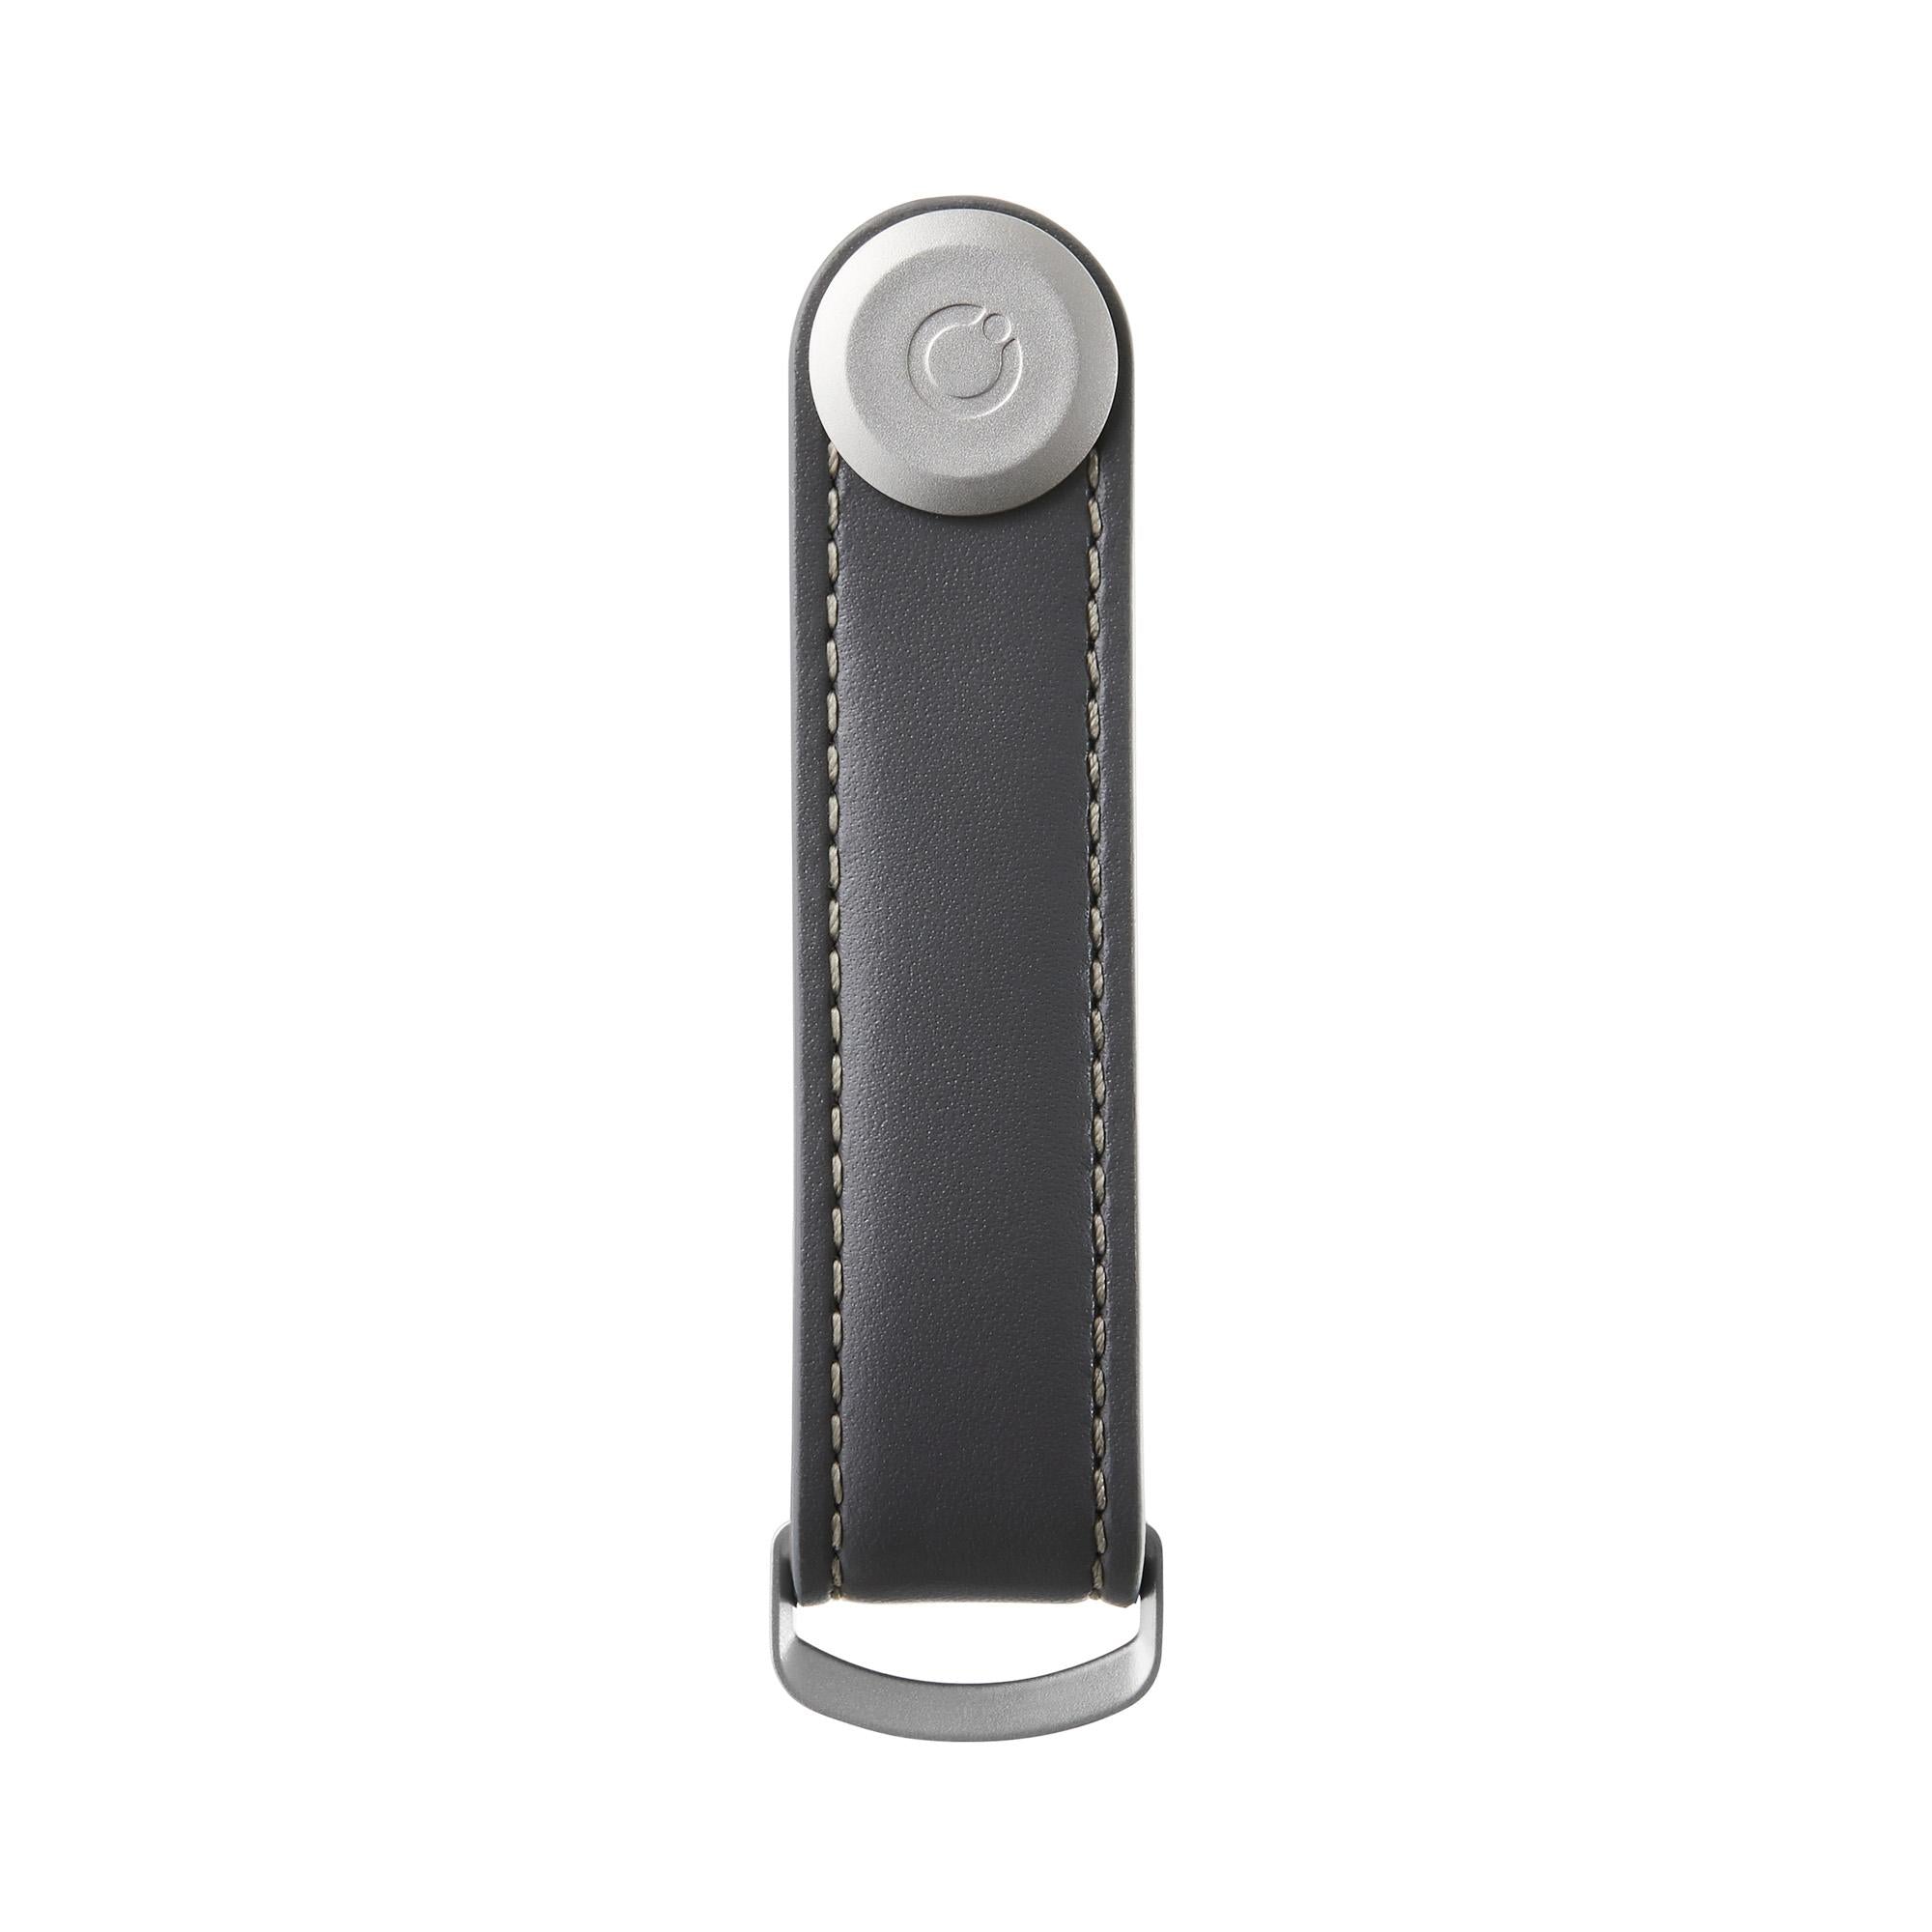 Orbitkey - Leather Charcoal with Grey Stitching